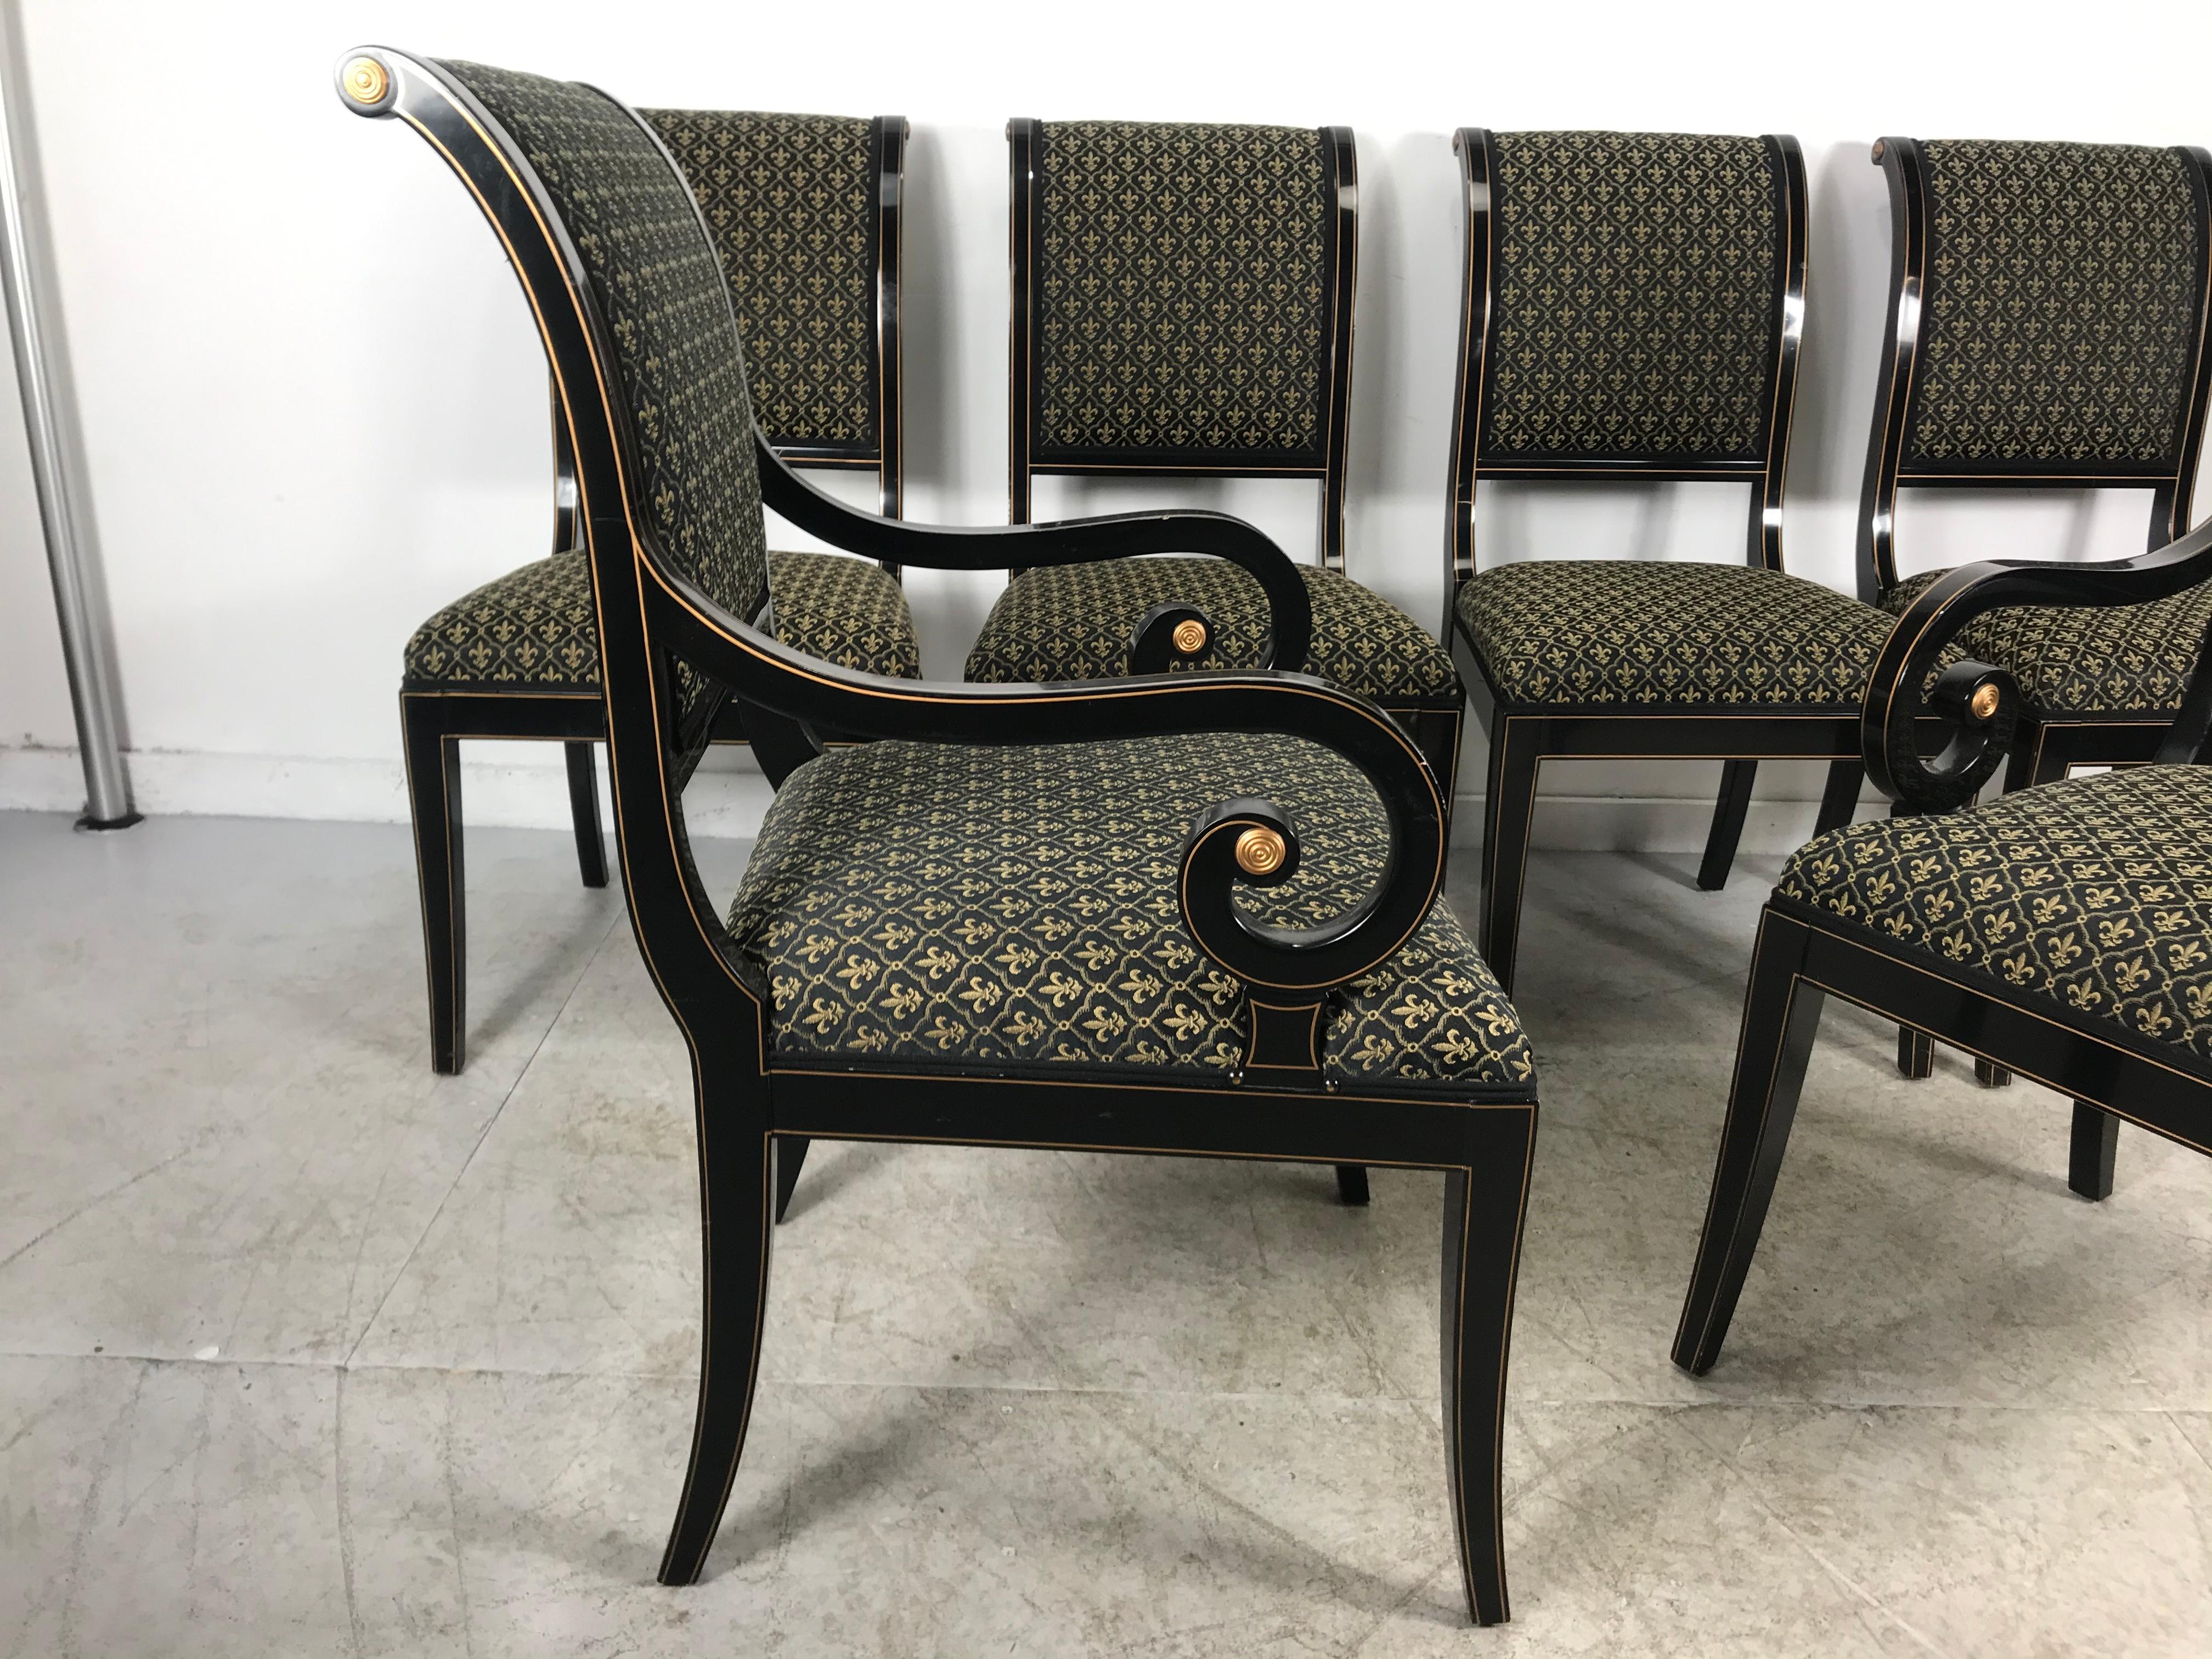 Stunning set of 6 black lacquer, gold accents, Regency modern dining chairs, recently reupholstered, set consists of two armchairs and four side chairs,, extremely comfortable and very well made, retain original finish and patina,, wear consistent